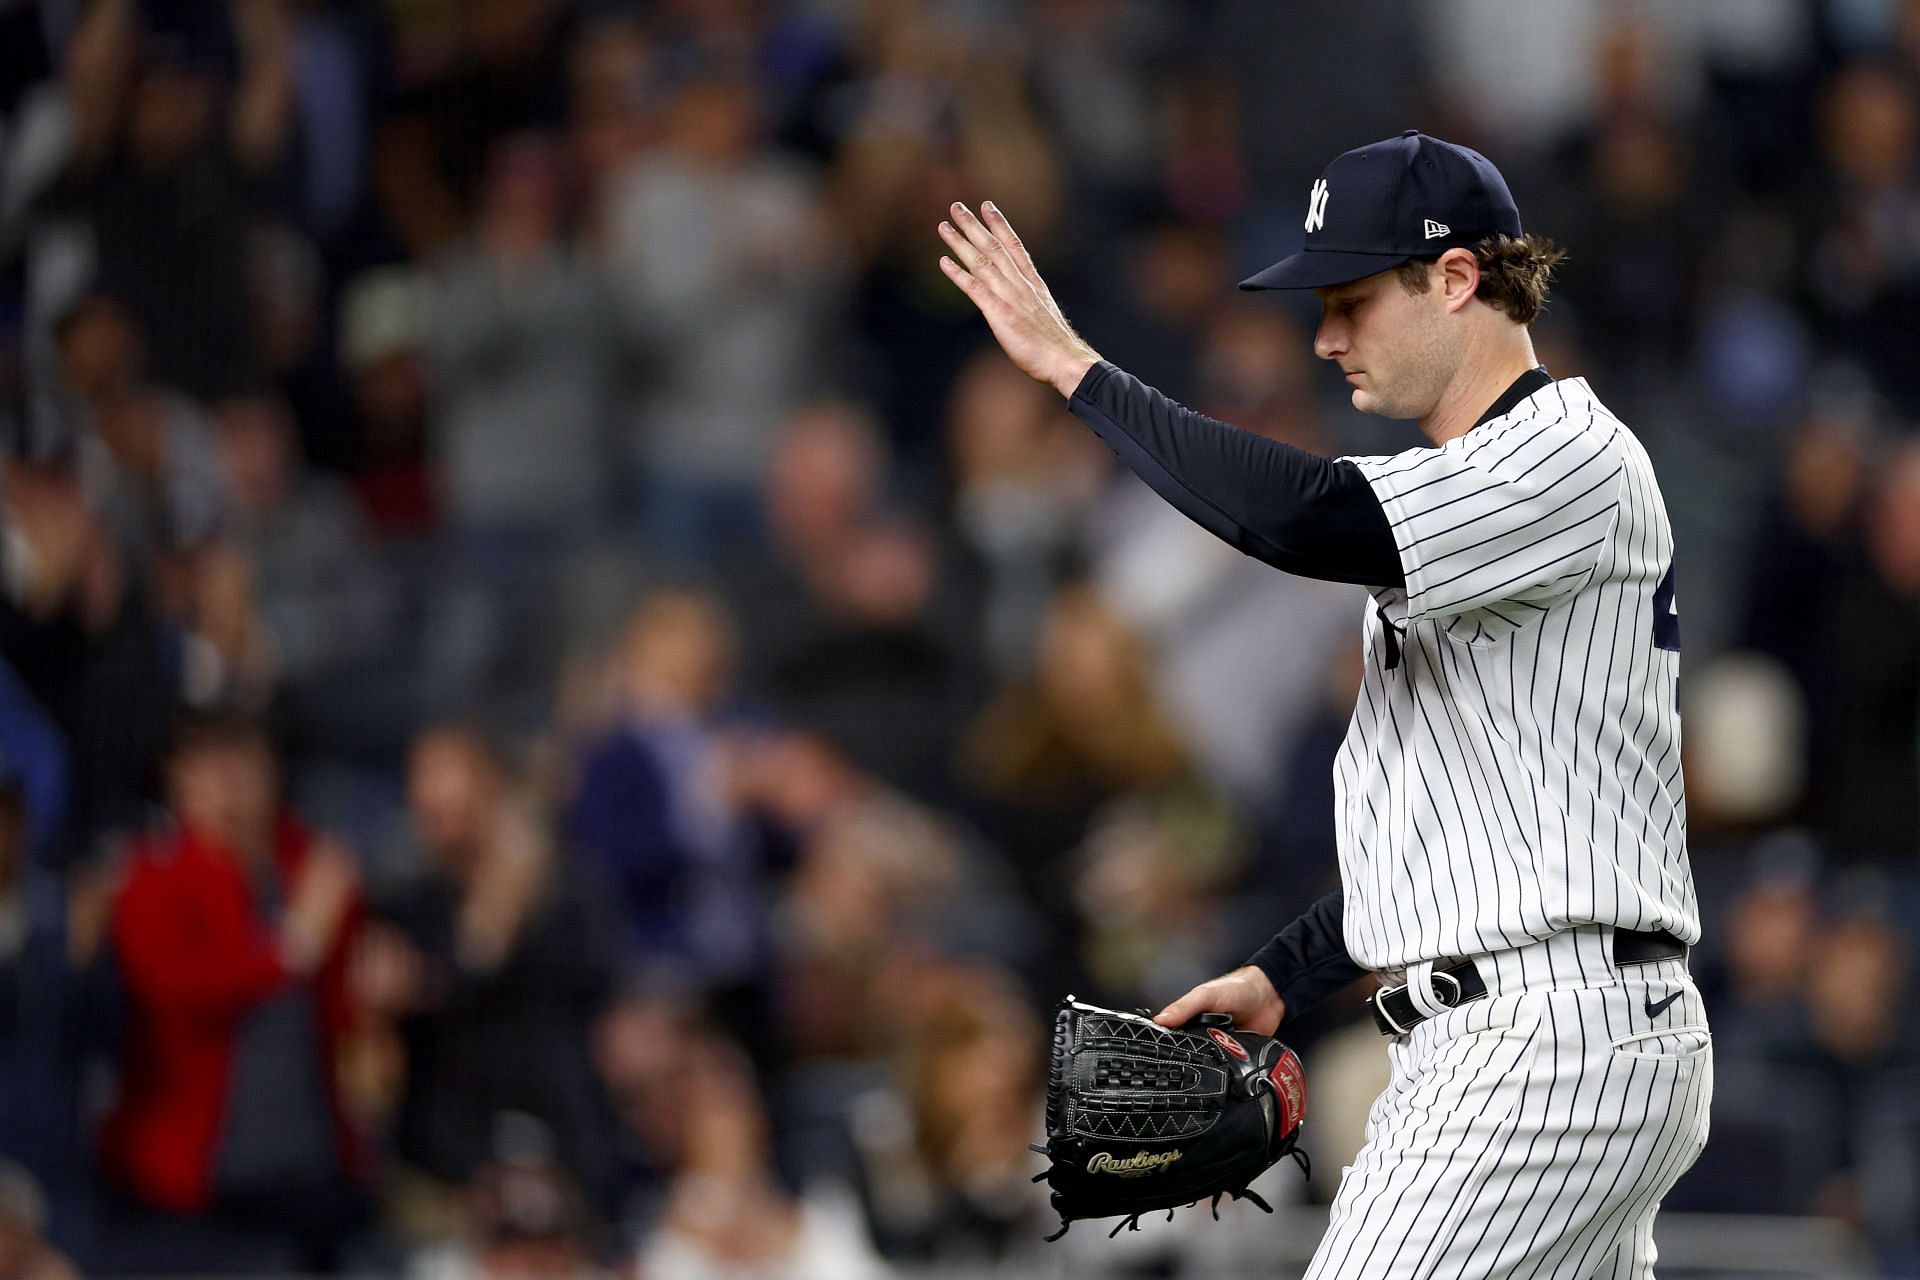 Gerrit Cole impressed in his first postseason start for the Yankees